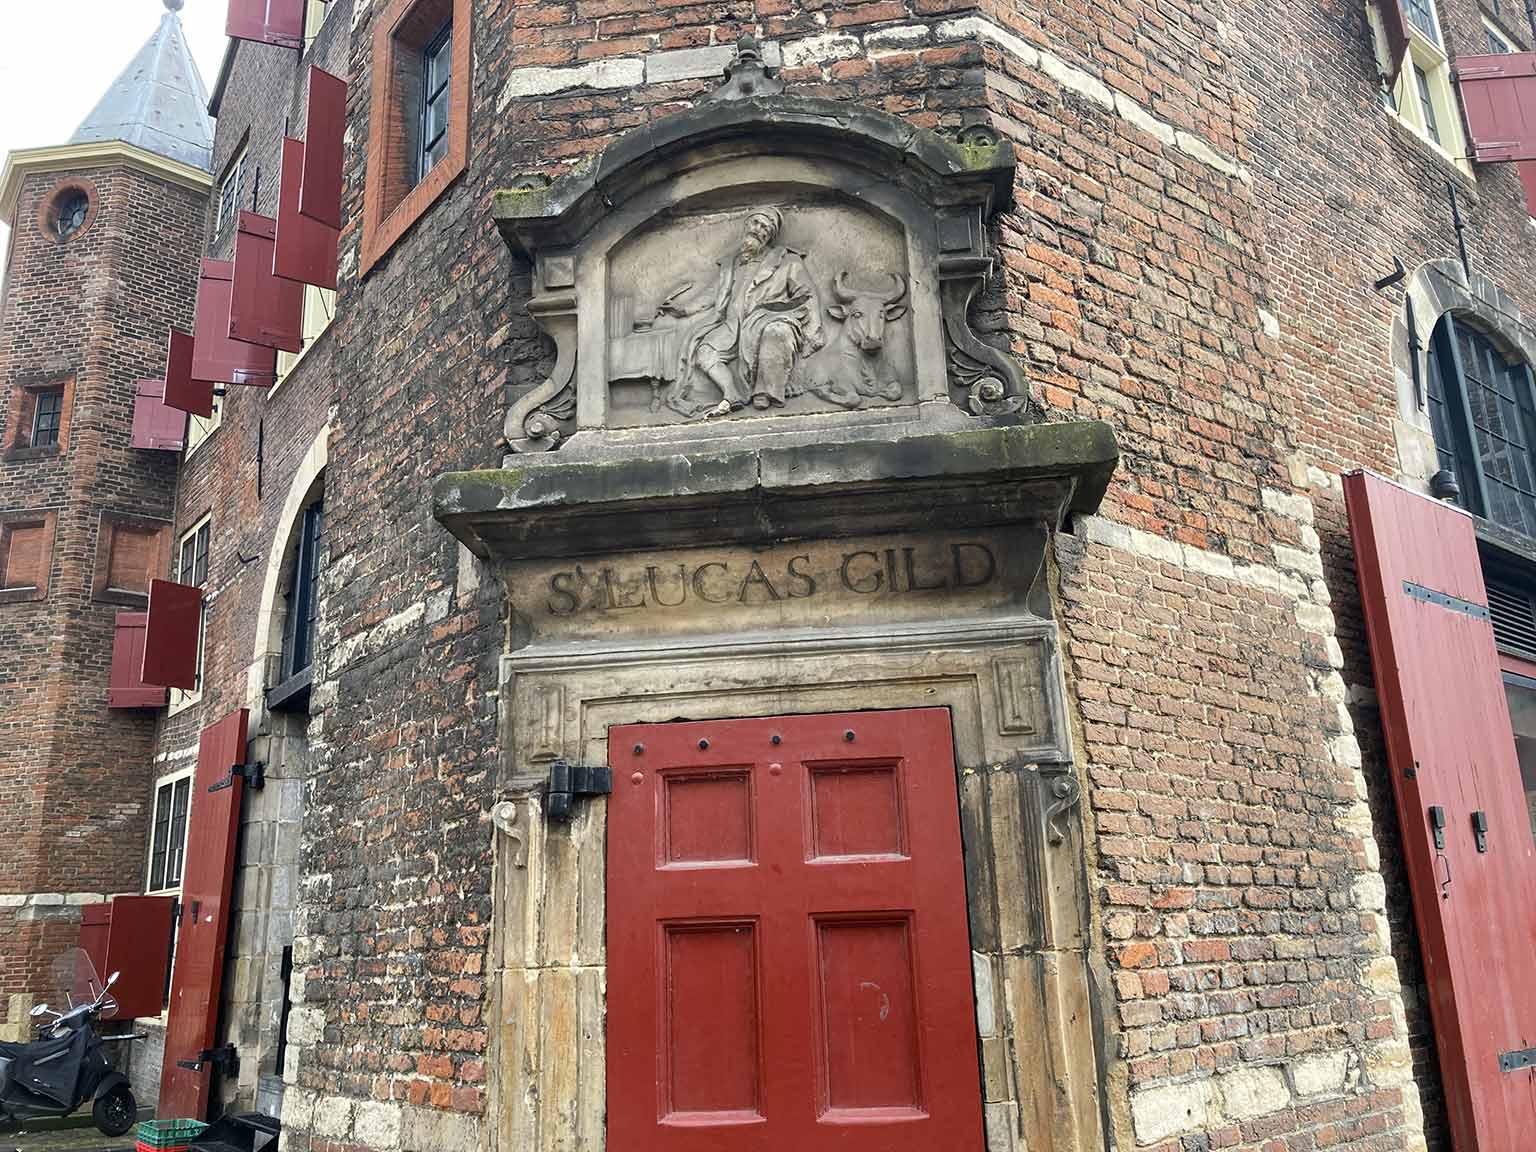 Entrance of the St. Lucas Guild tower on Waag, Nieuwmarkt, Amsterdam